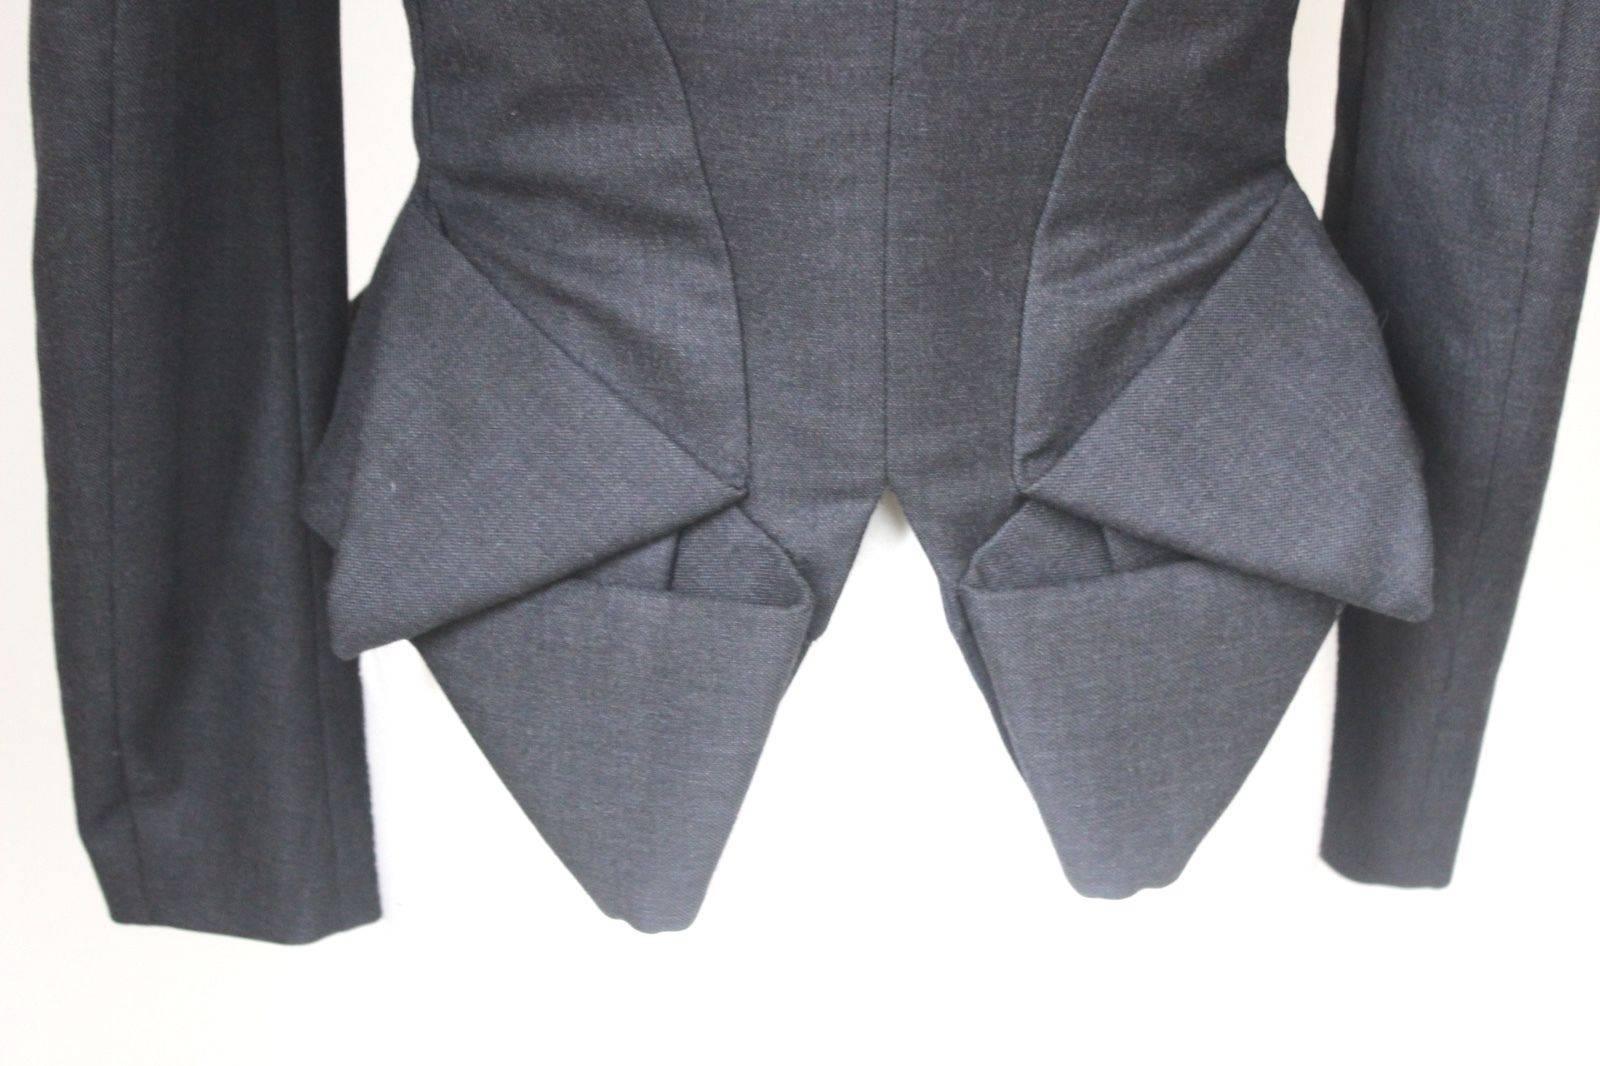 Bottega Vaneta Structured Grey Origami Jacket 42 uk 10 In Excellent Condition For Sale In London, GB